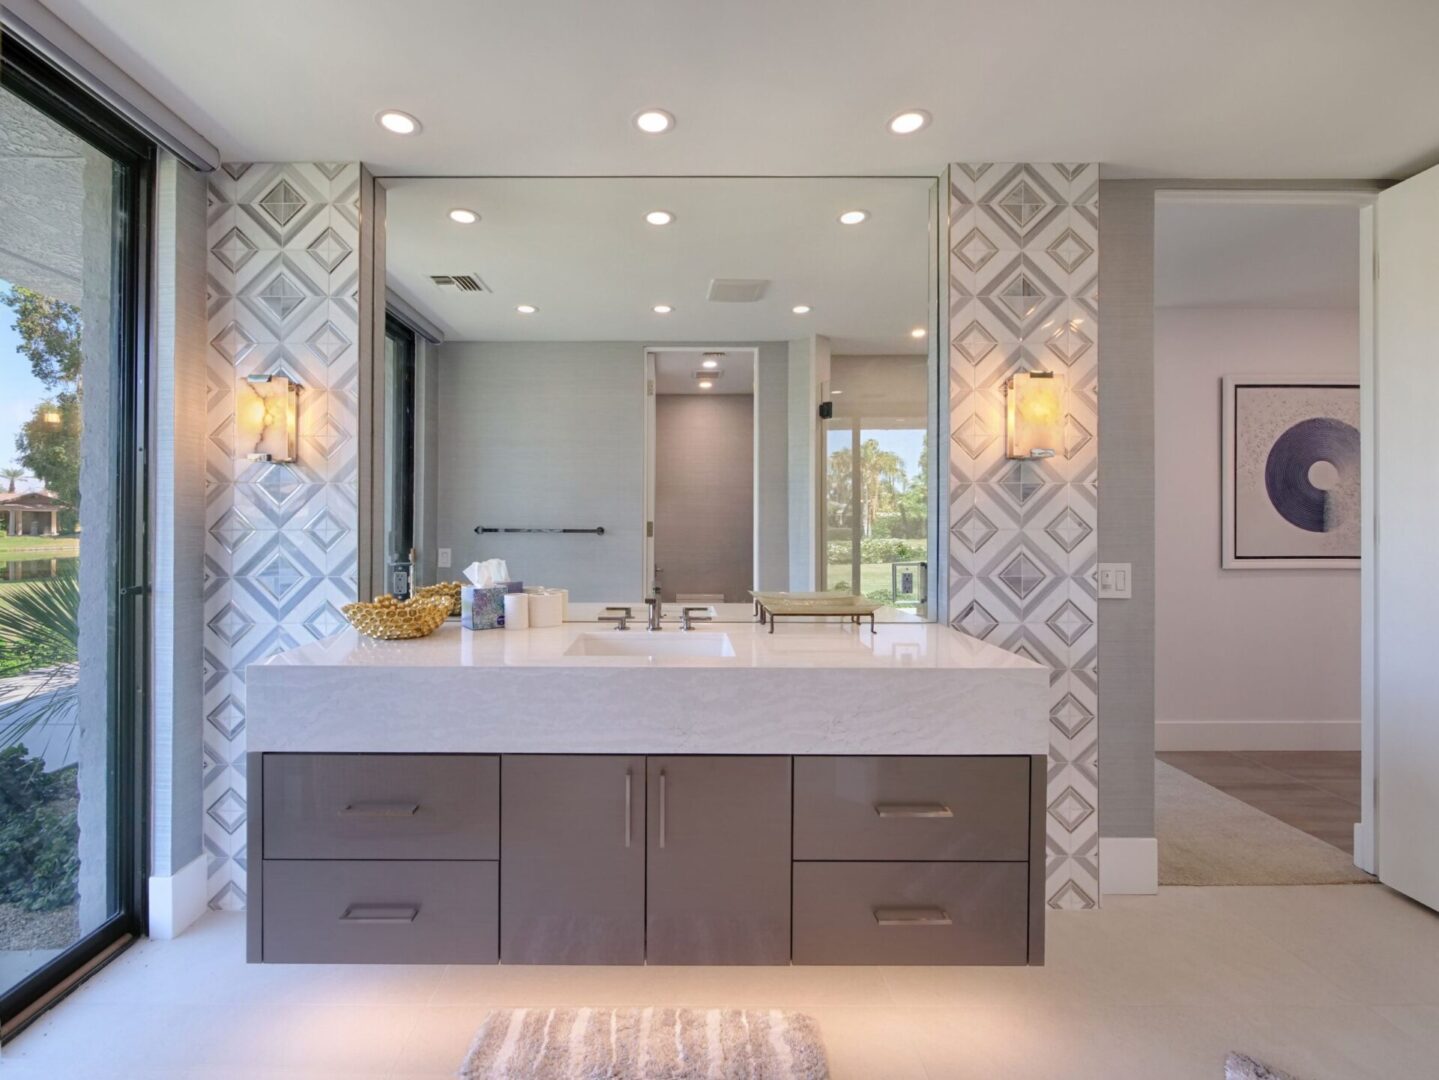 A bathroom with a large mirror and two sinks.